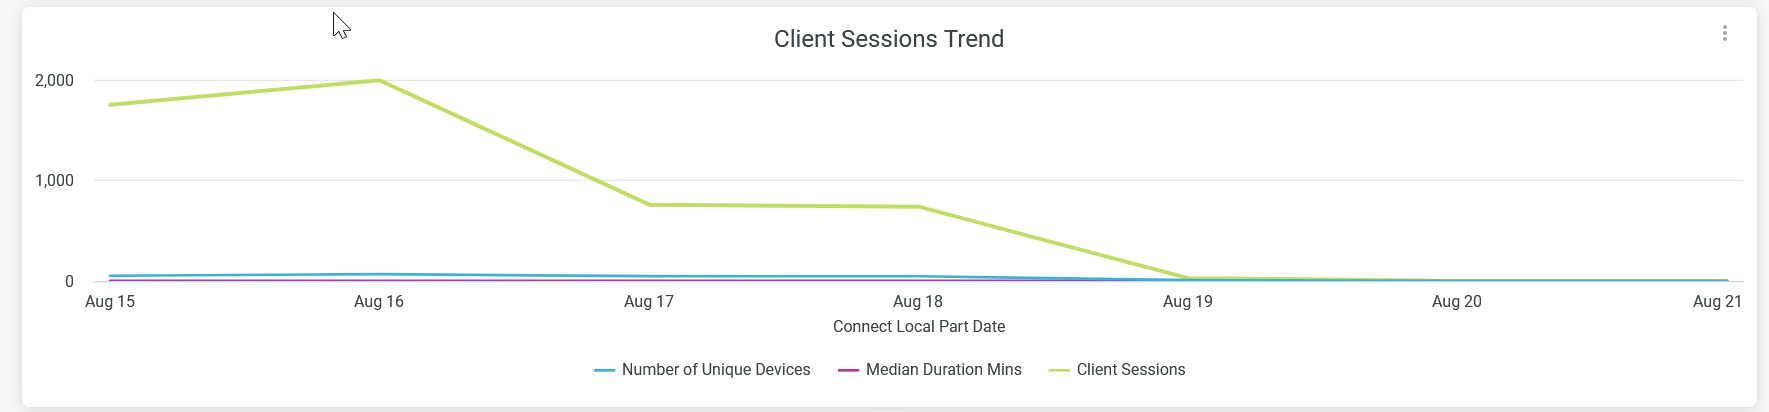 Wireless Client Sessions Trend